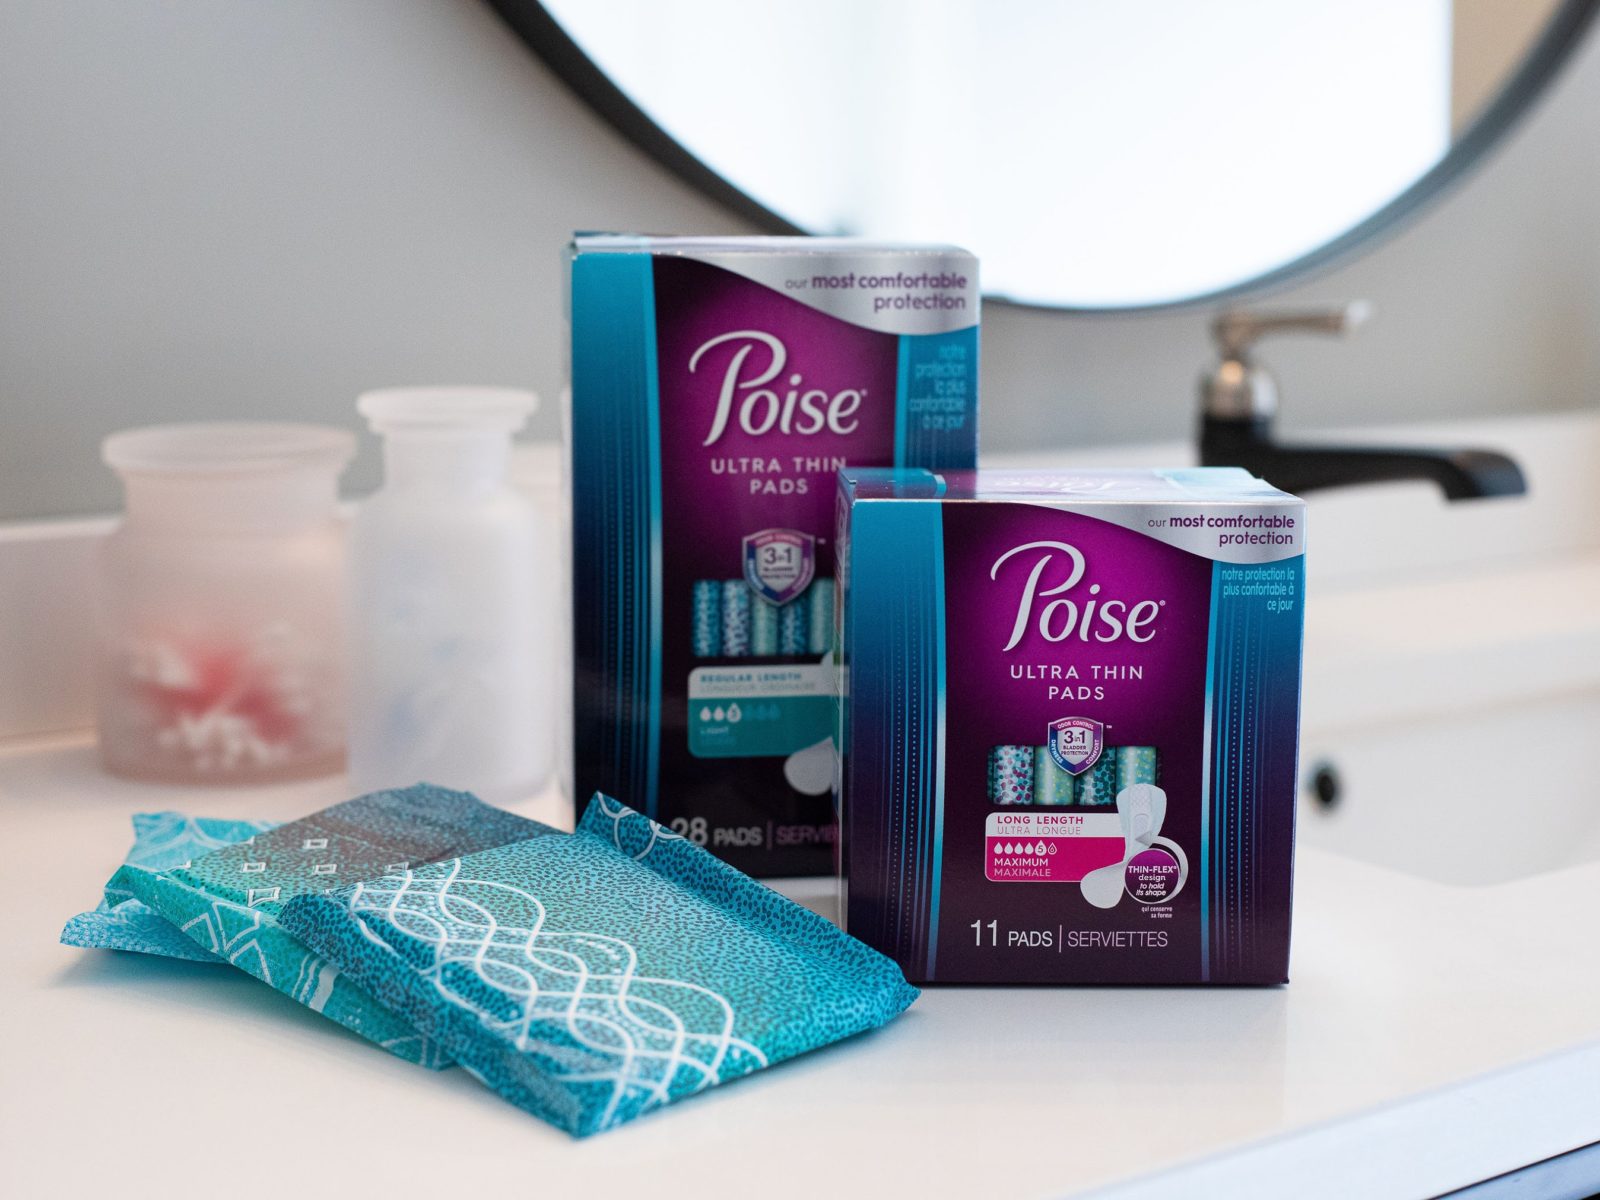 Save $3 On Poise® Ultra Thin Pads At Publix - Get A Flexible Fit For Whatever Happens! on I Heart Publix 1